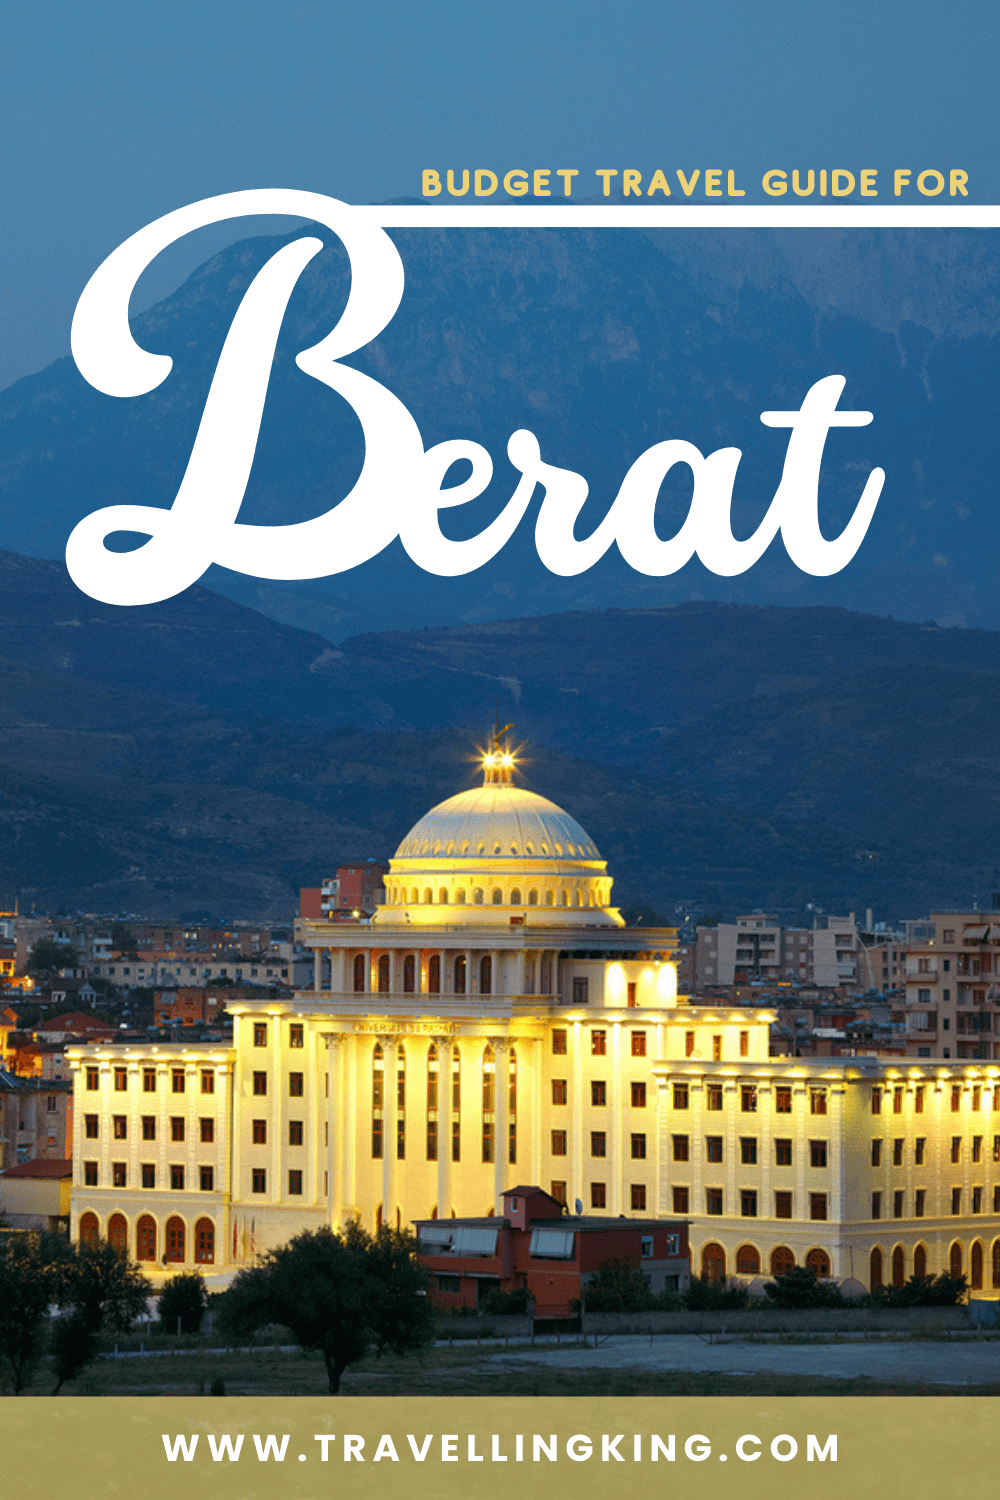 Budget Travel Guide for Berat